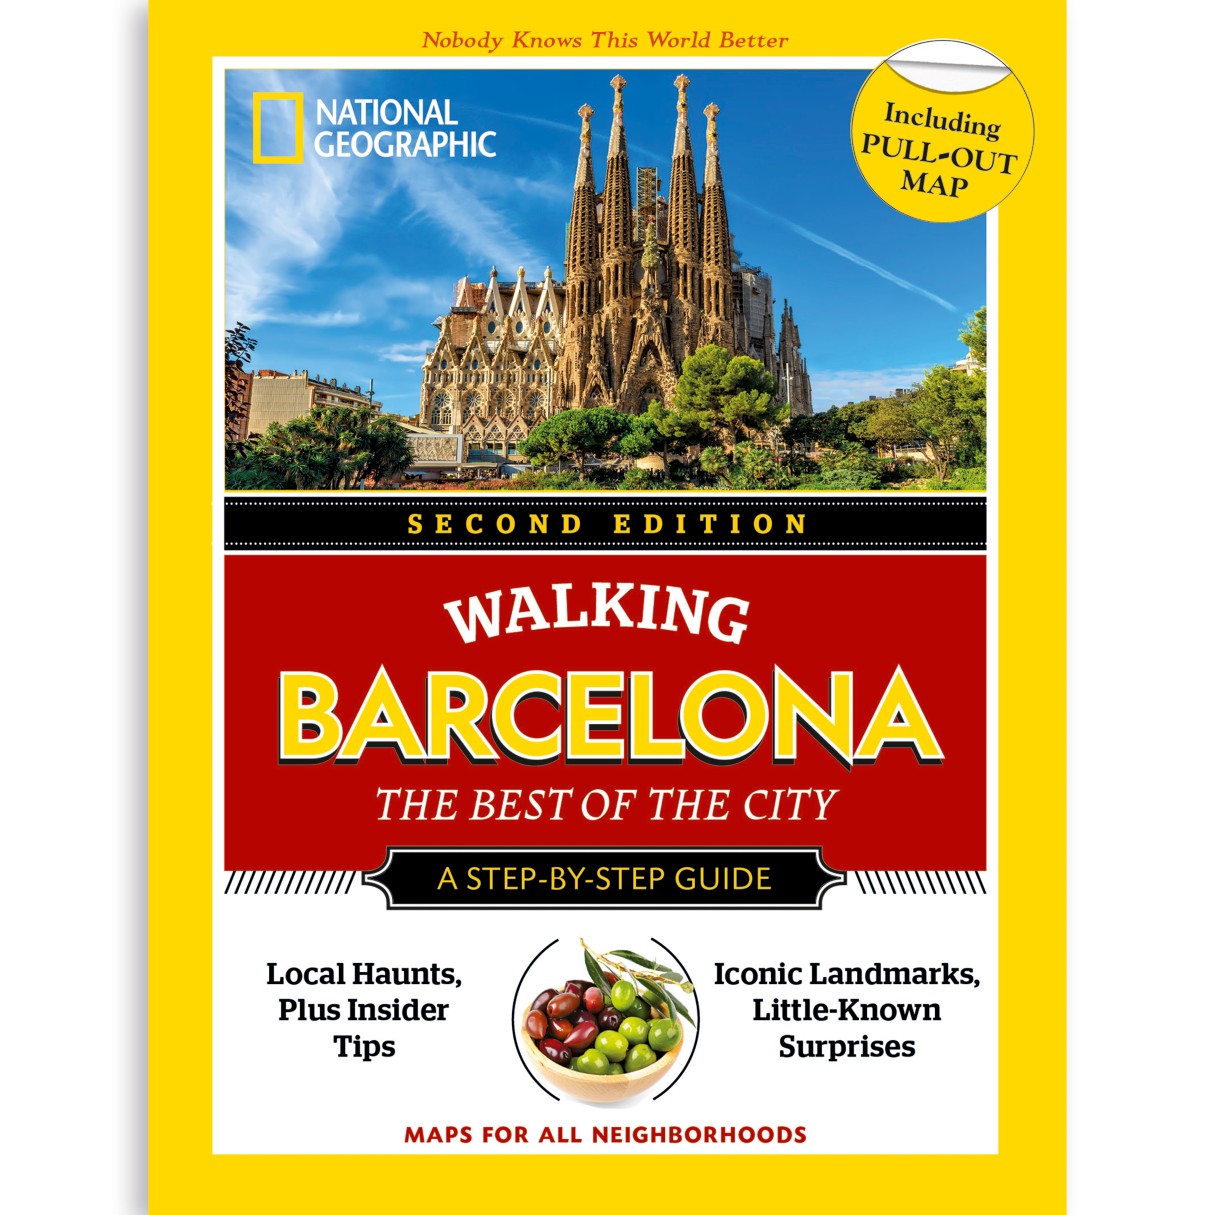 National Geographic Walking Barcelona: The Best of the City Guide, Second Edition